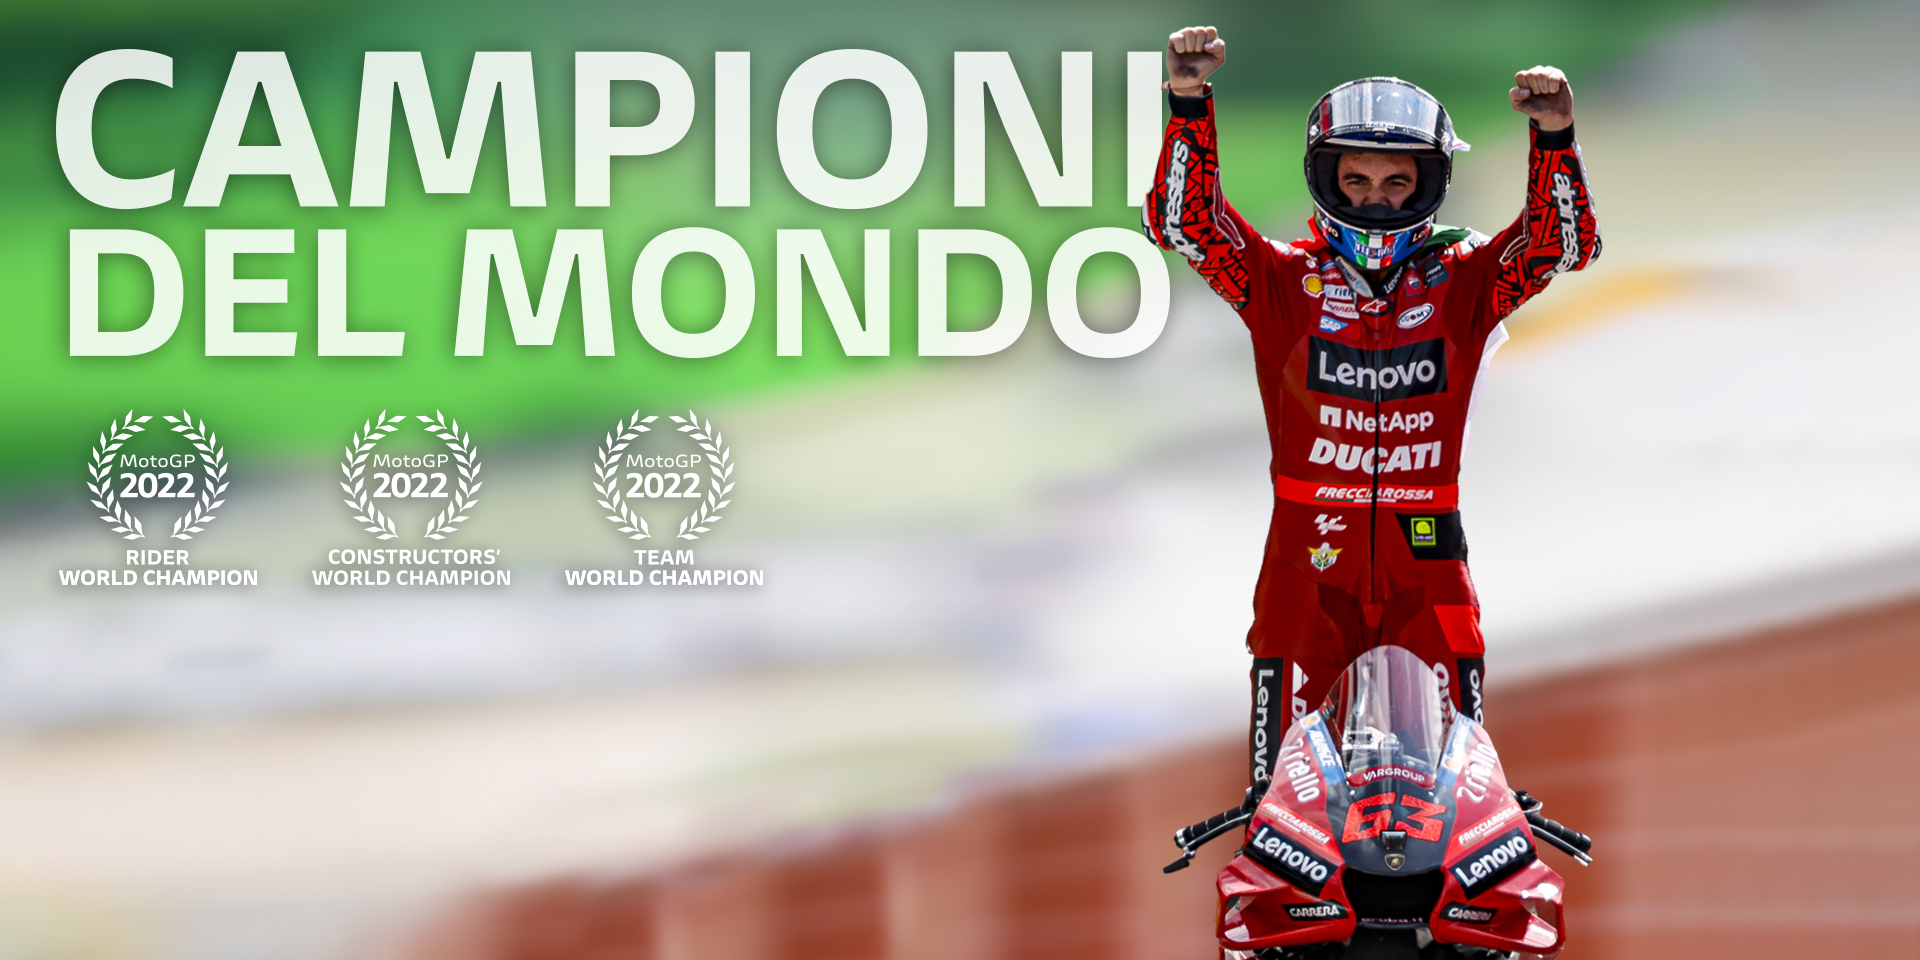 Champions of the world! Made in Italy passion and technology conquer MotoGP